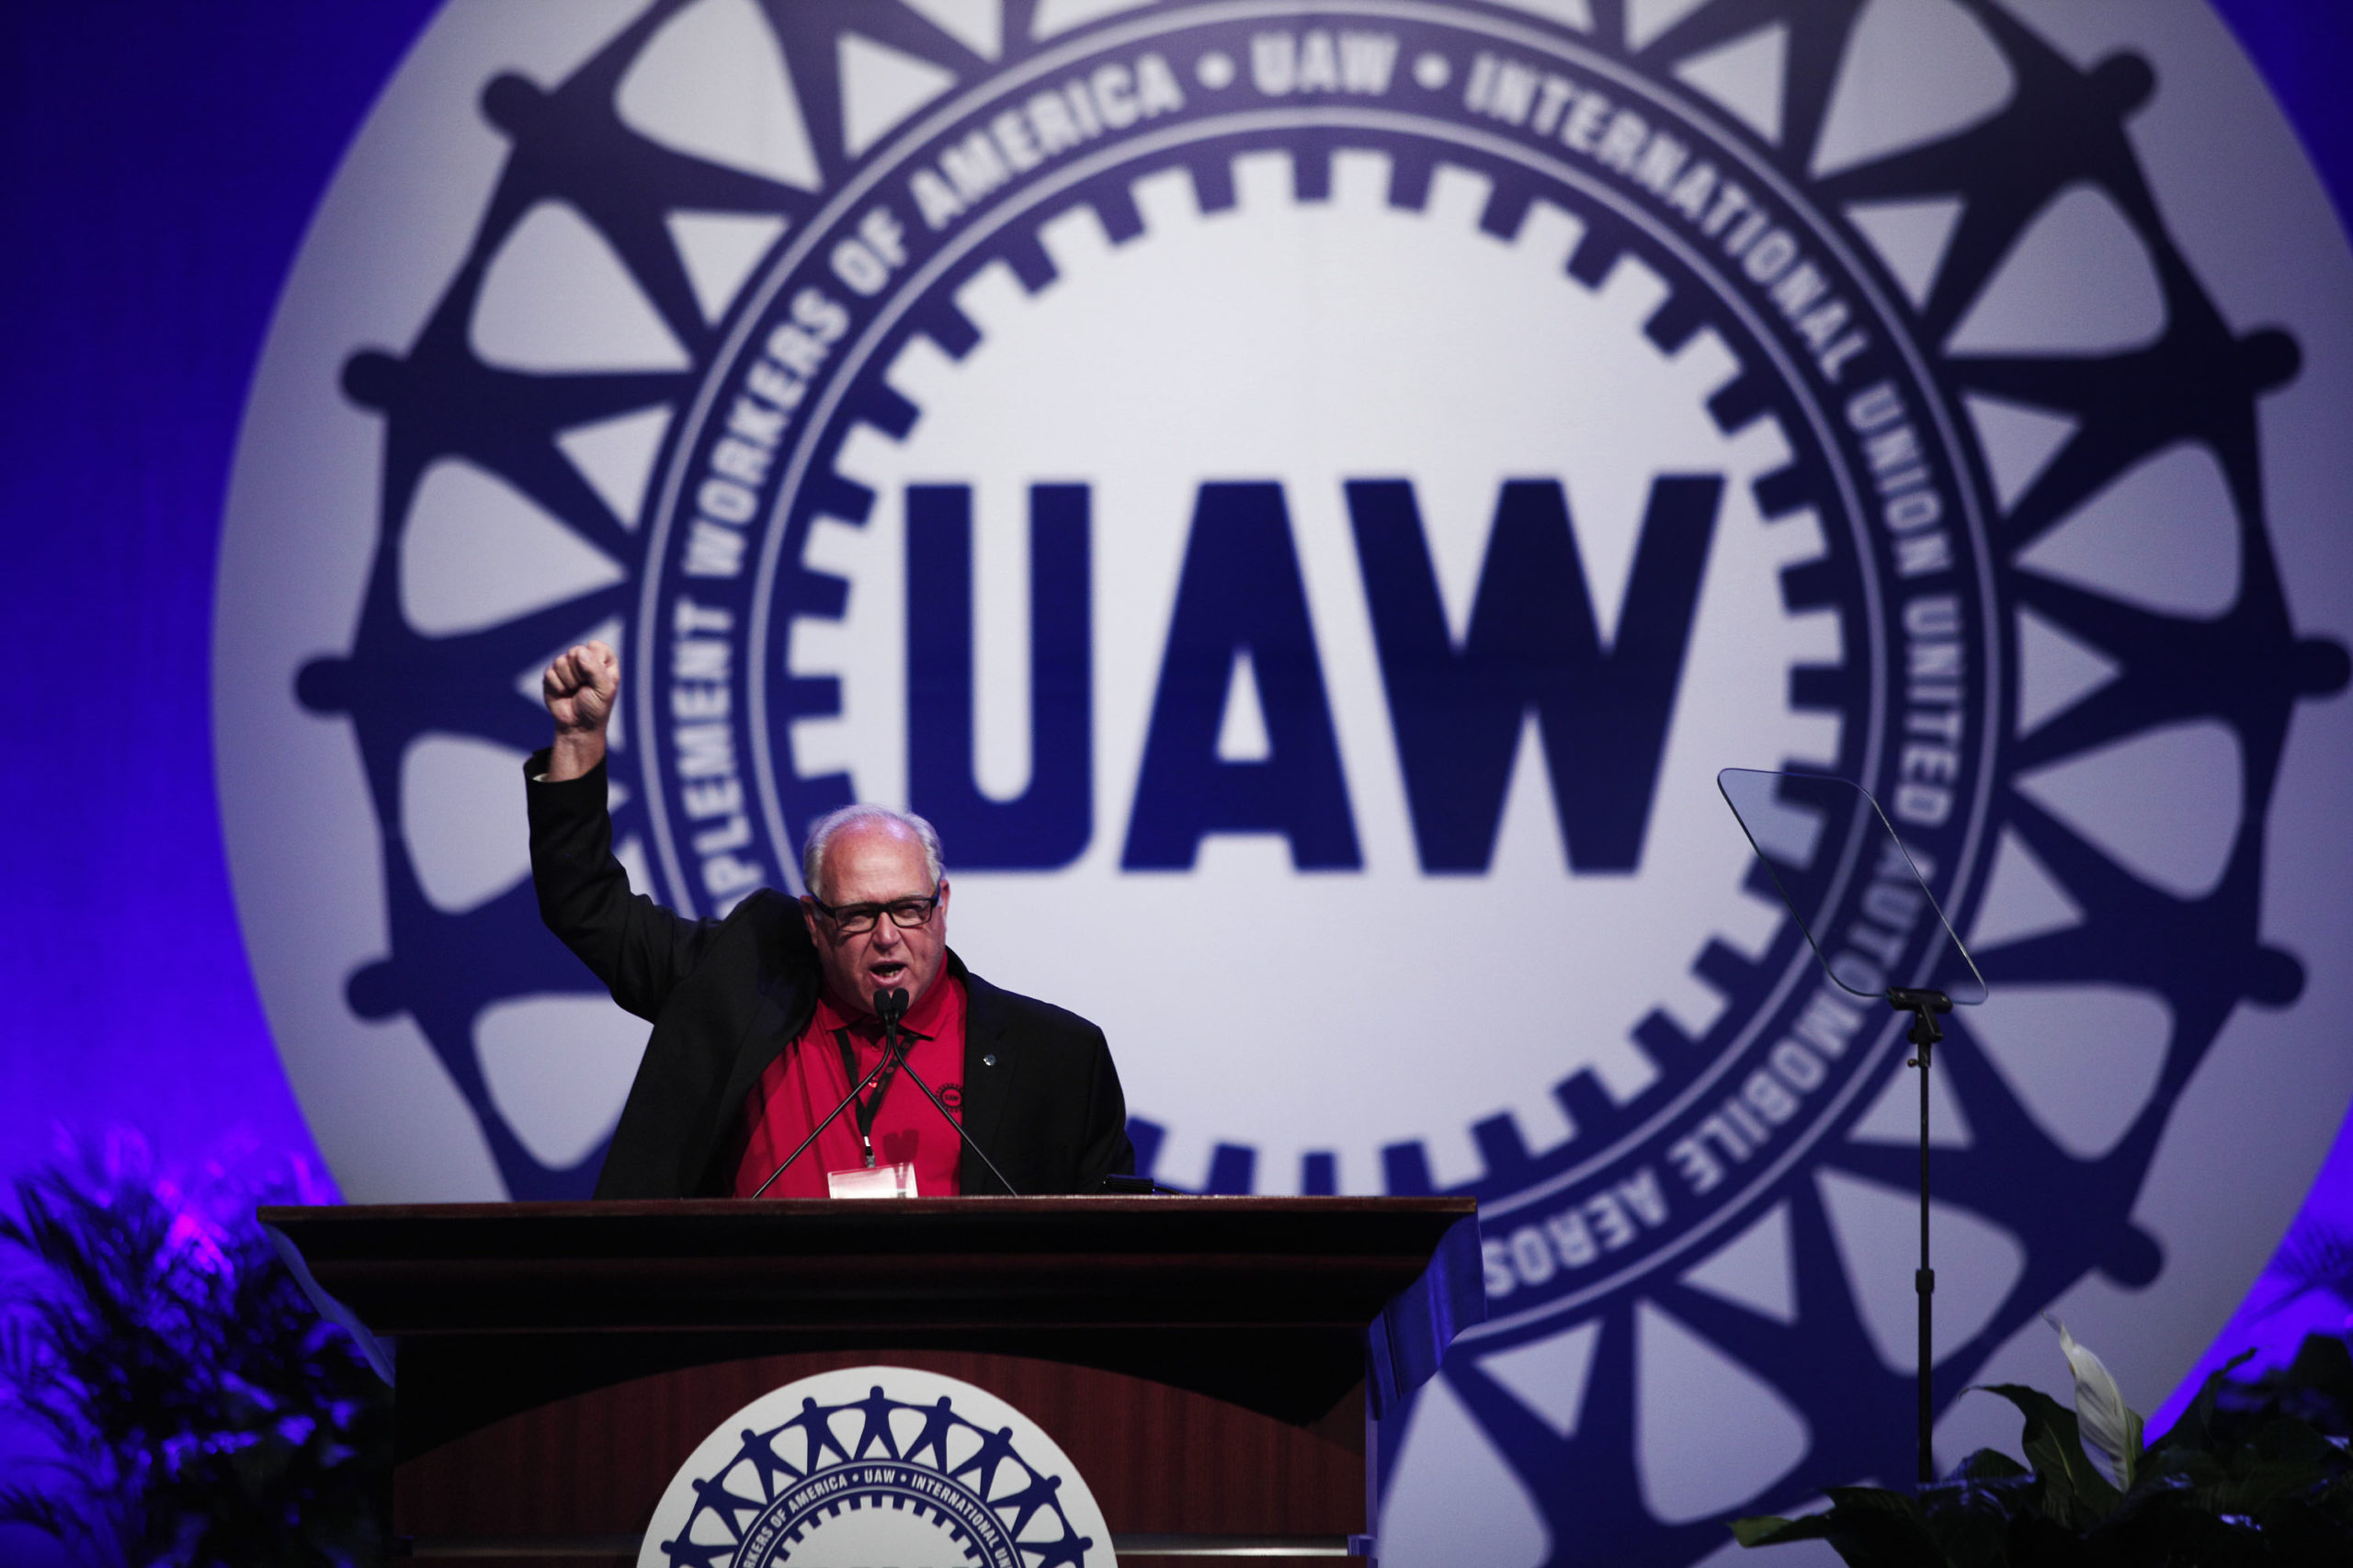 United Auto Workers President Dennis Williams speaks to delegates at the UAW Special Convention on Collective Bargaining at Cobo Center March 25, 2015 in Detroit, Michigan. (Bill Pugliano/Getty Images)